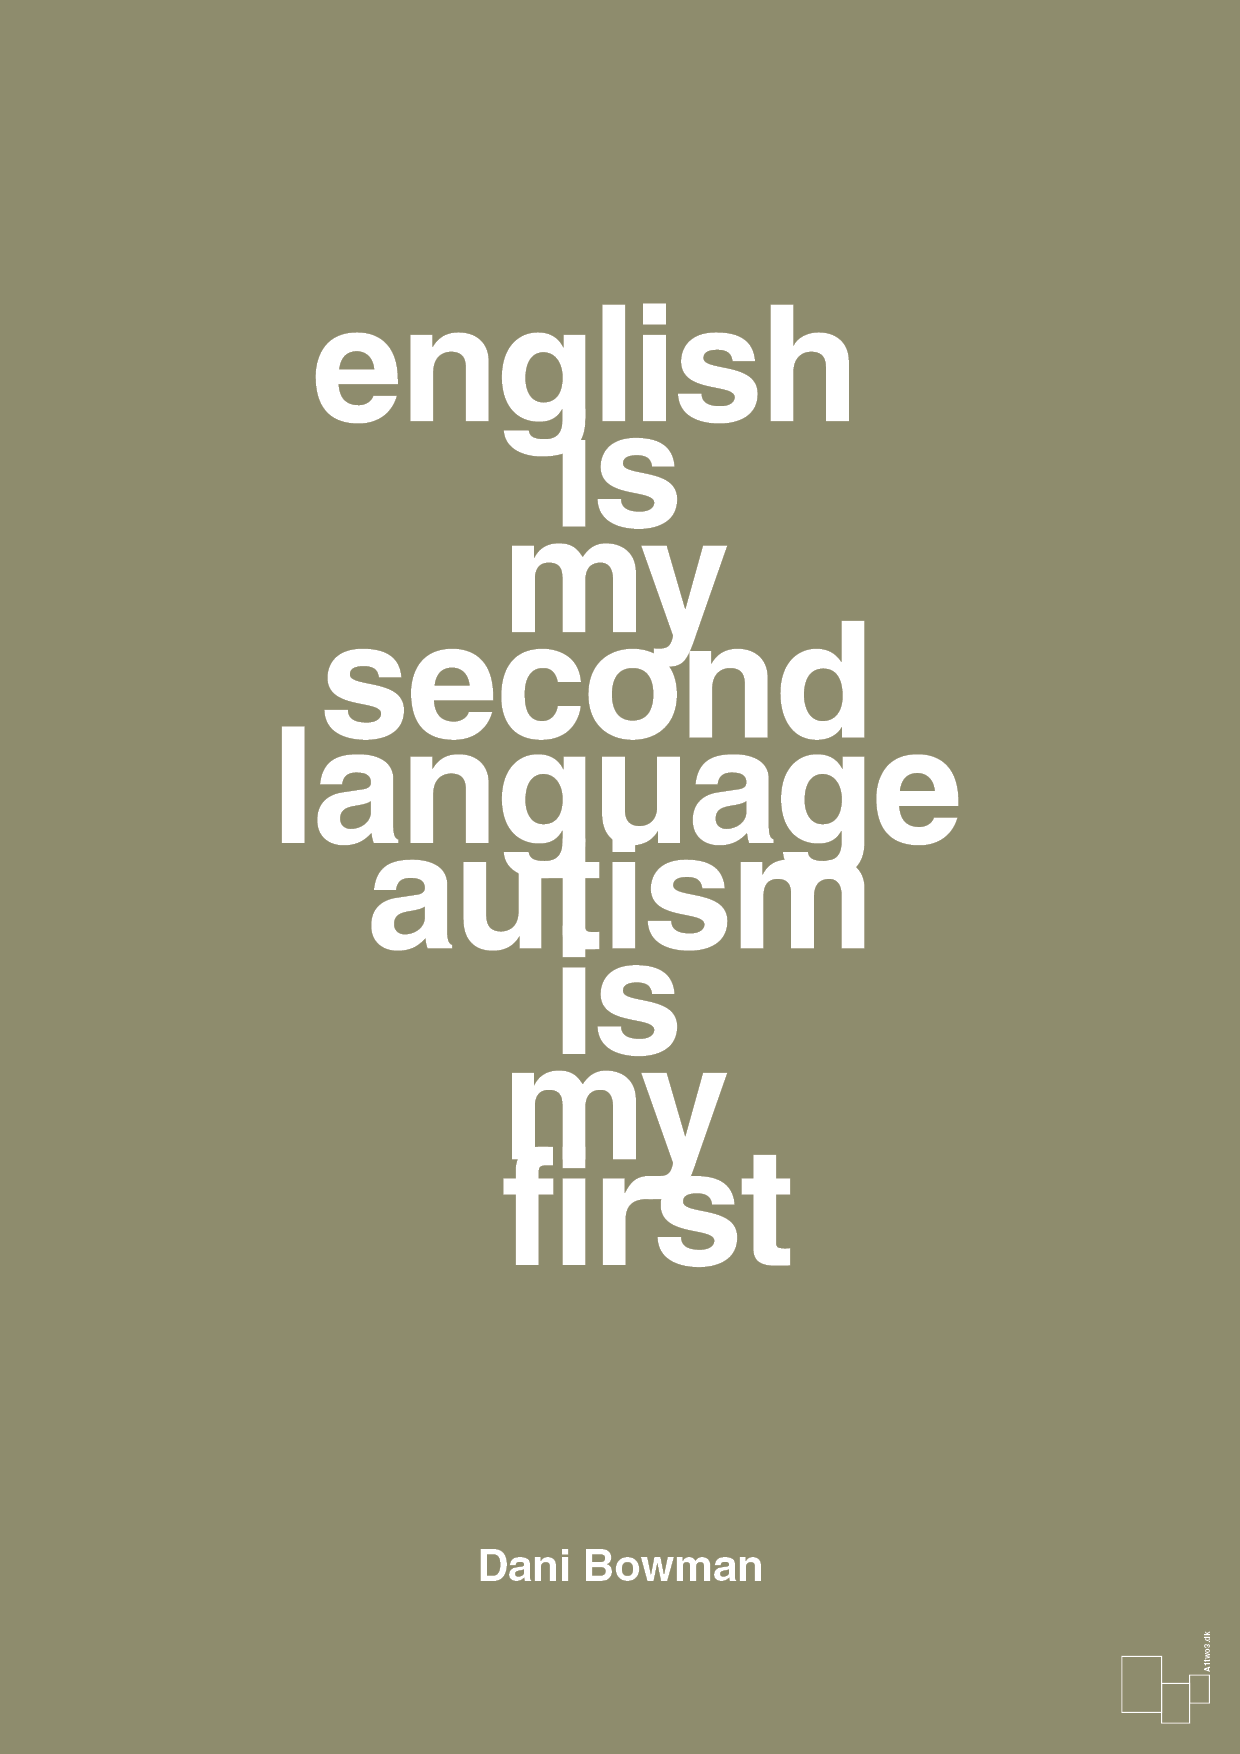 english is my second language autism is my first - Plakat med Samfund i Misty Forrest